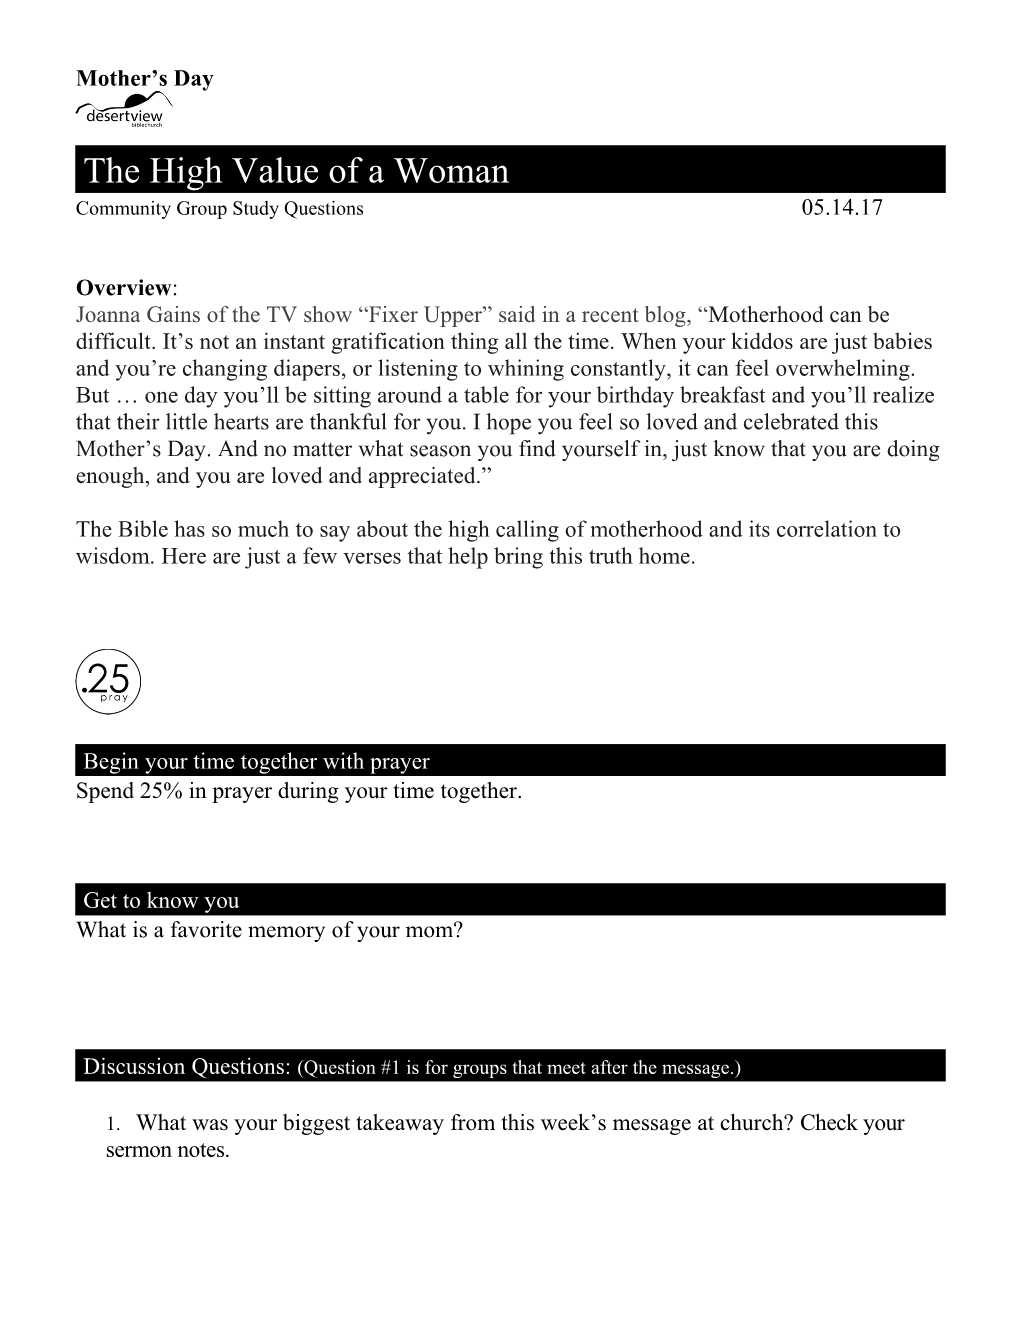 The High Value of a Woman